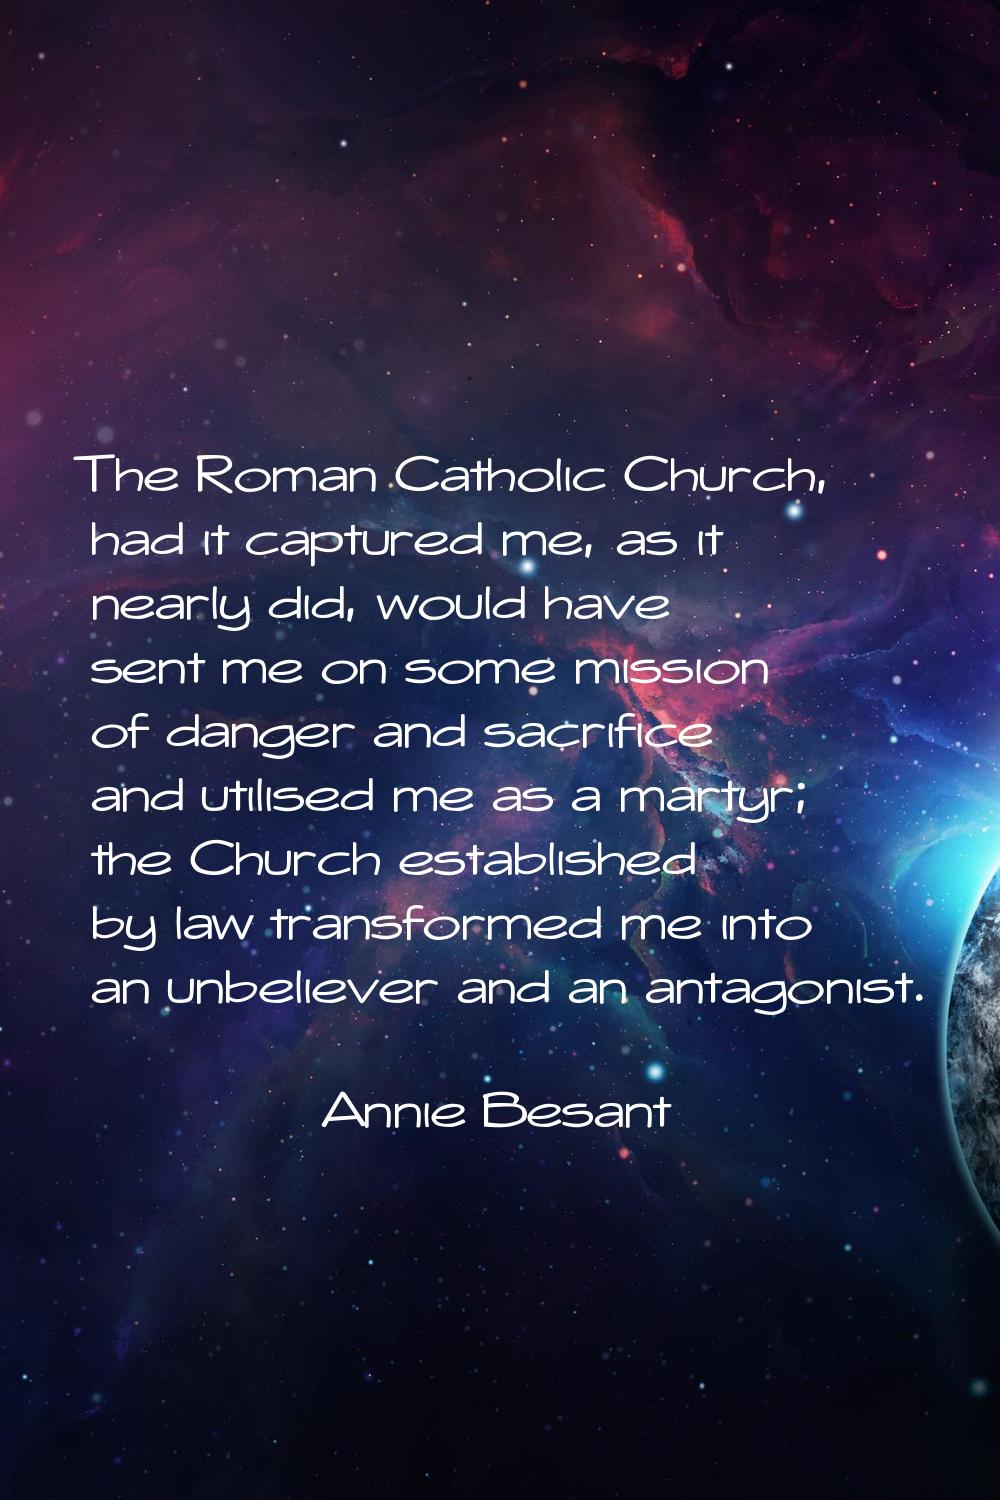 The Roman Catholic Church, had it captured me, as it nearly did, would have sent me on some mission